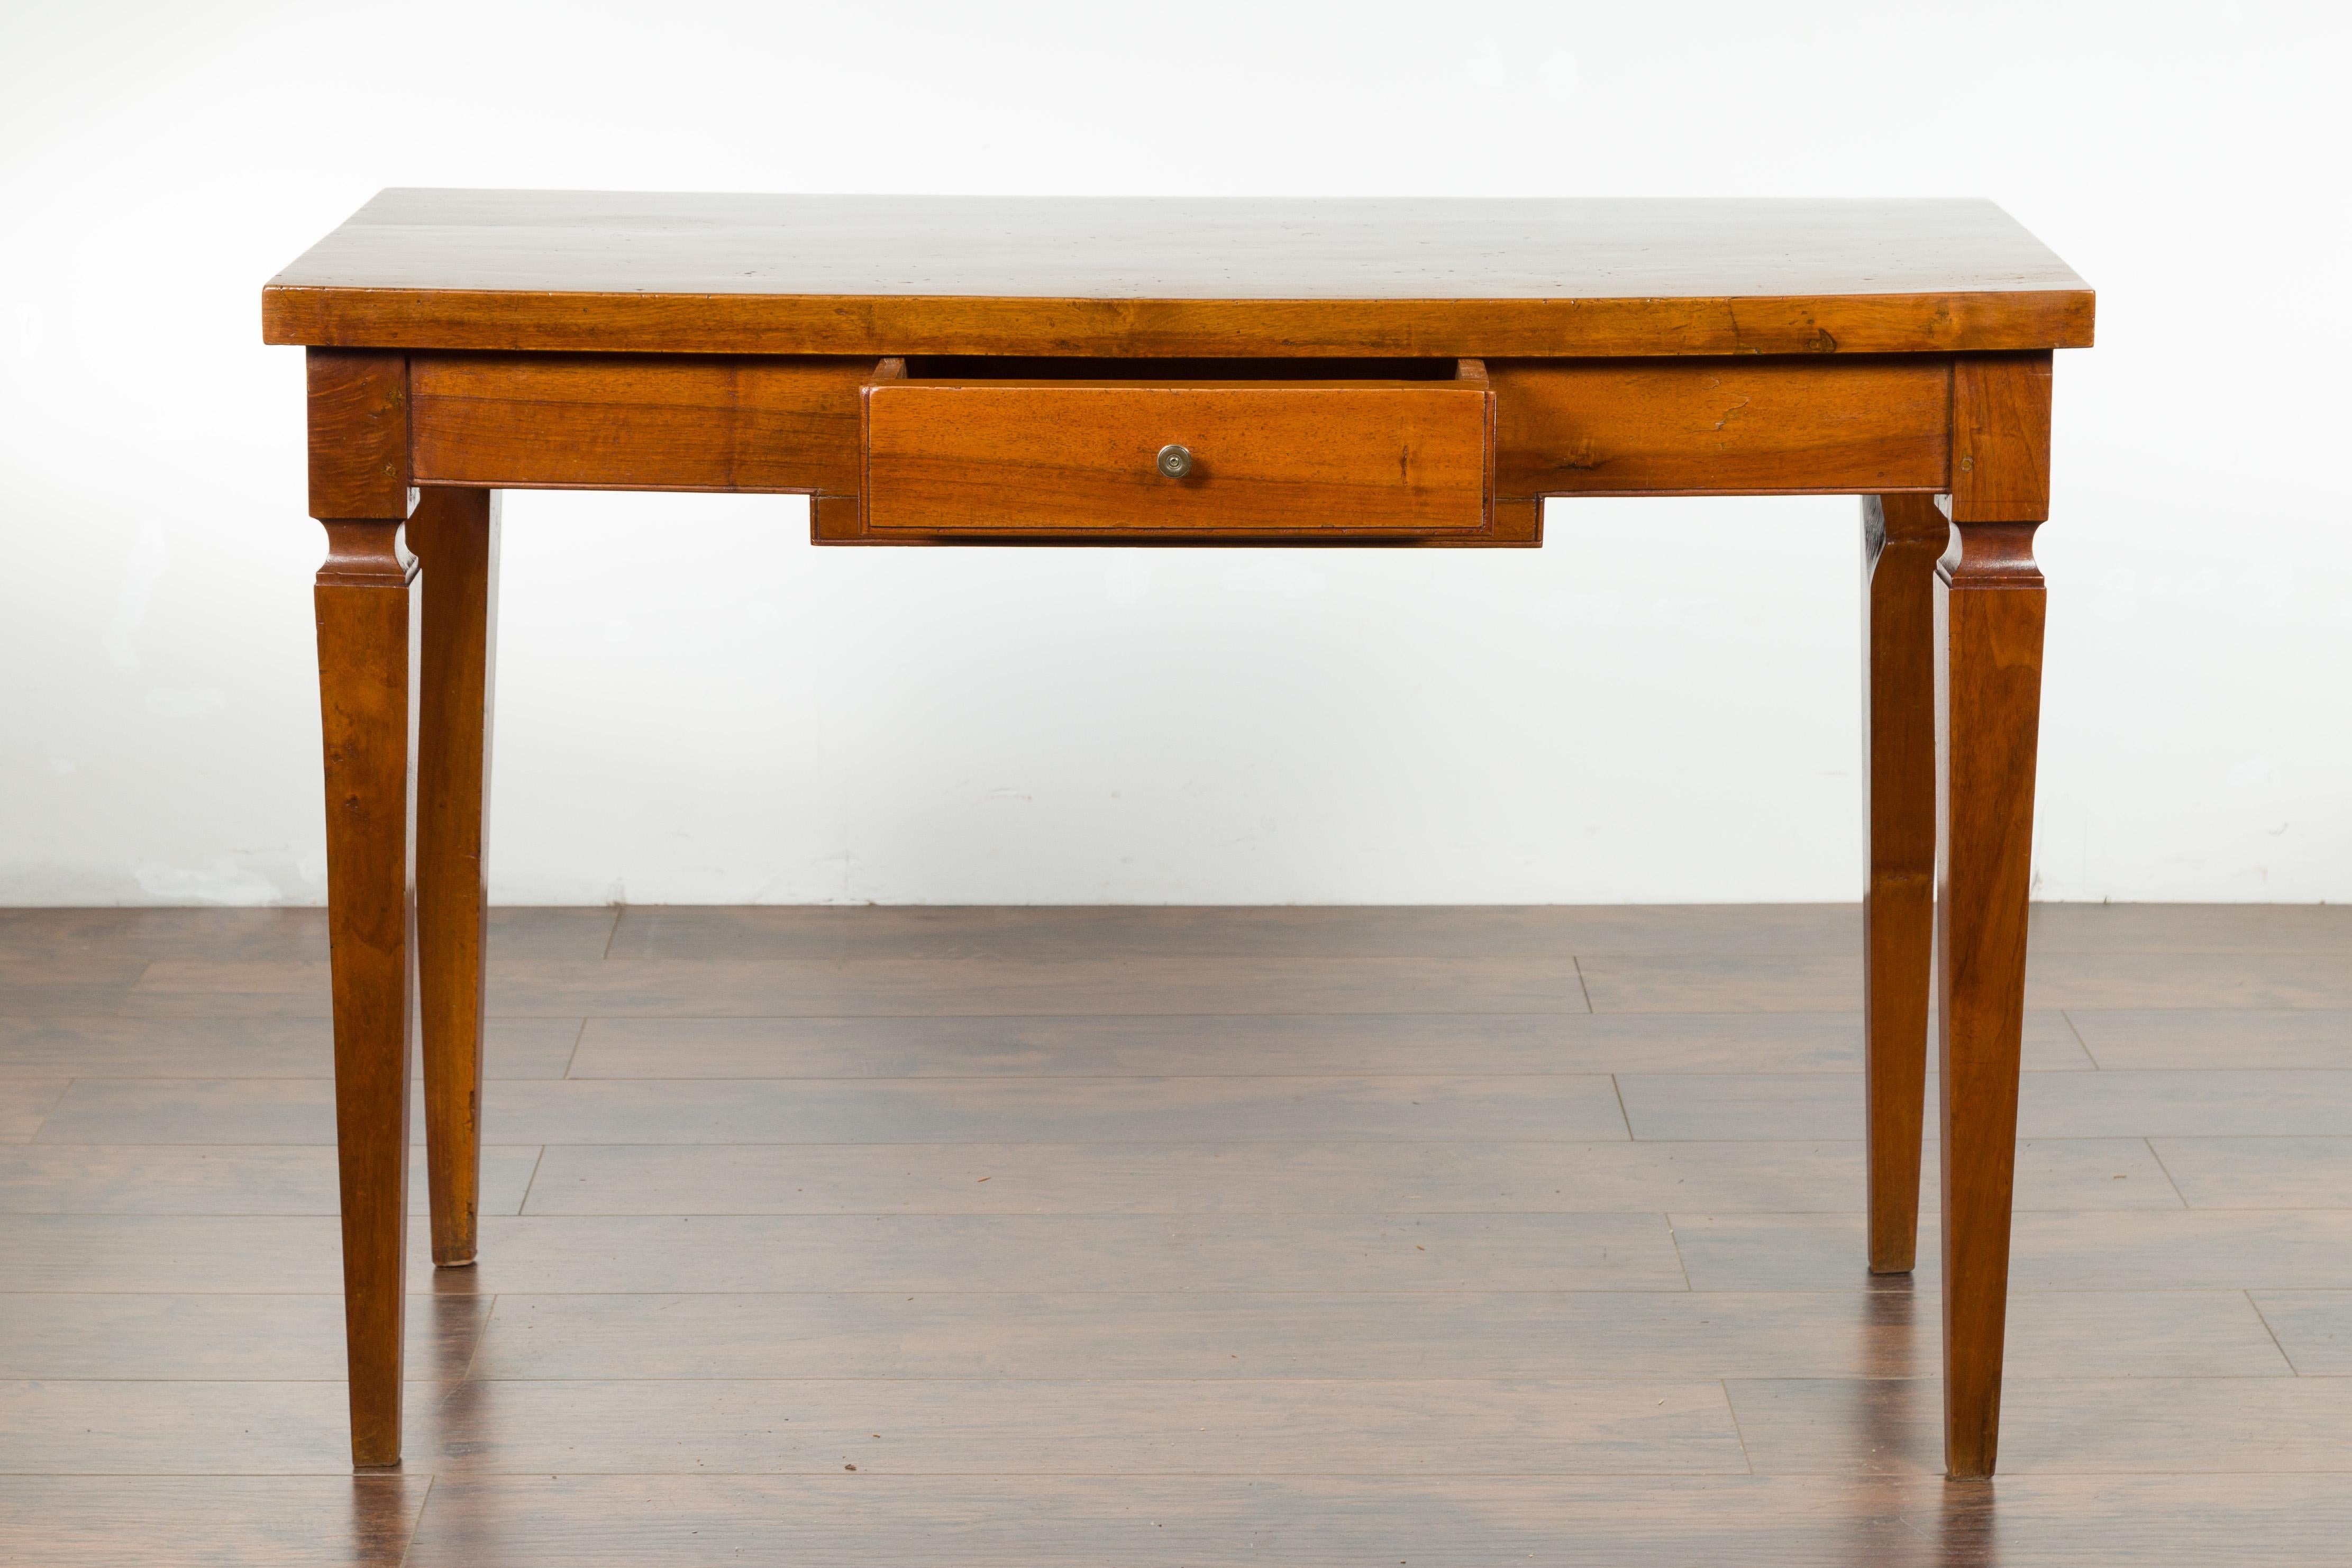 Italian 19th Century Walnut Desk with Single Drawer and Tapered Legs For Sale 6